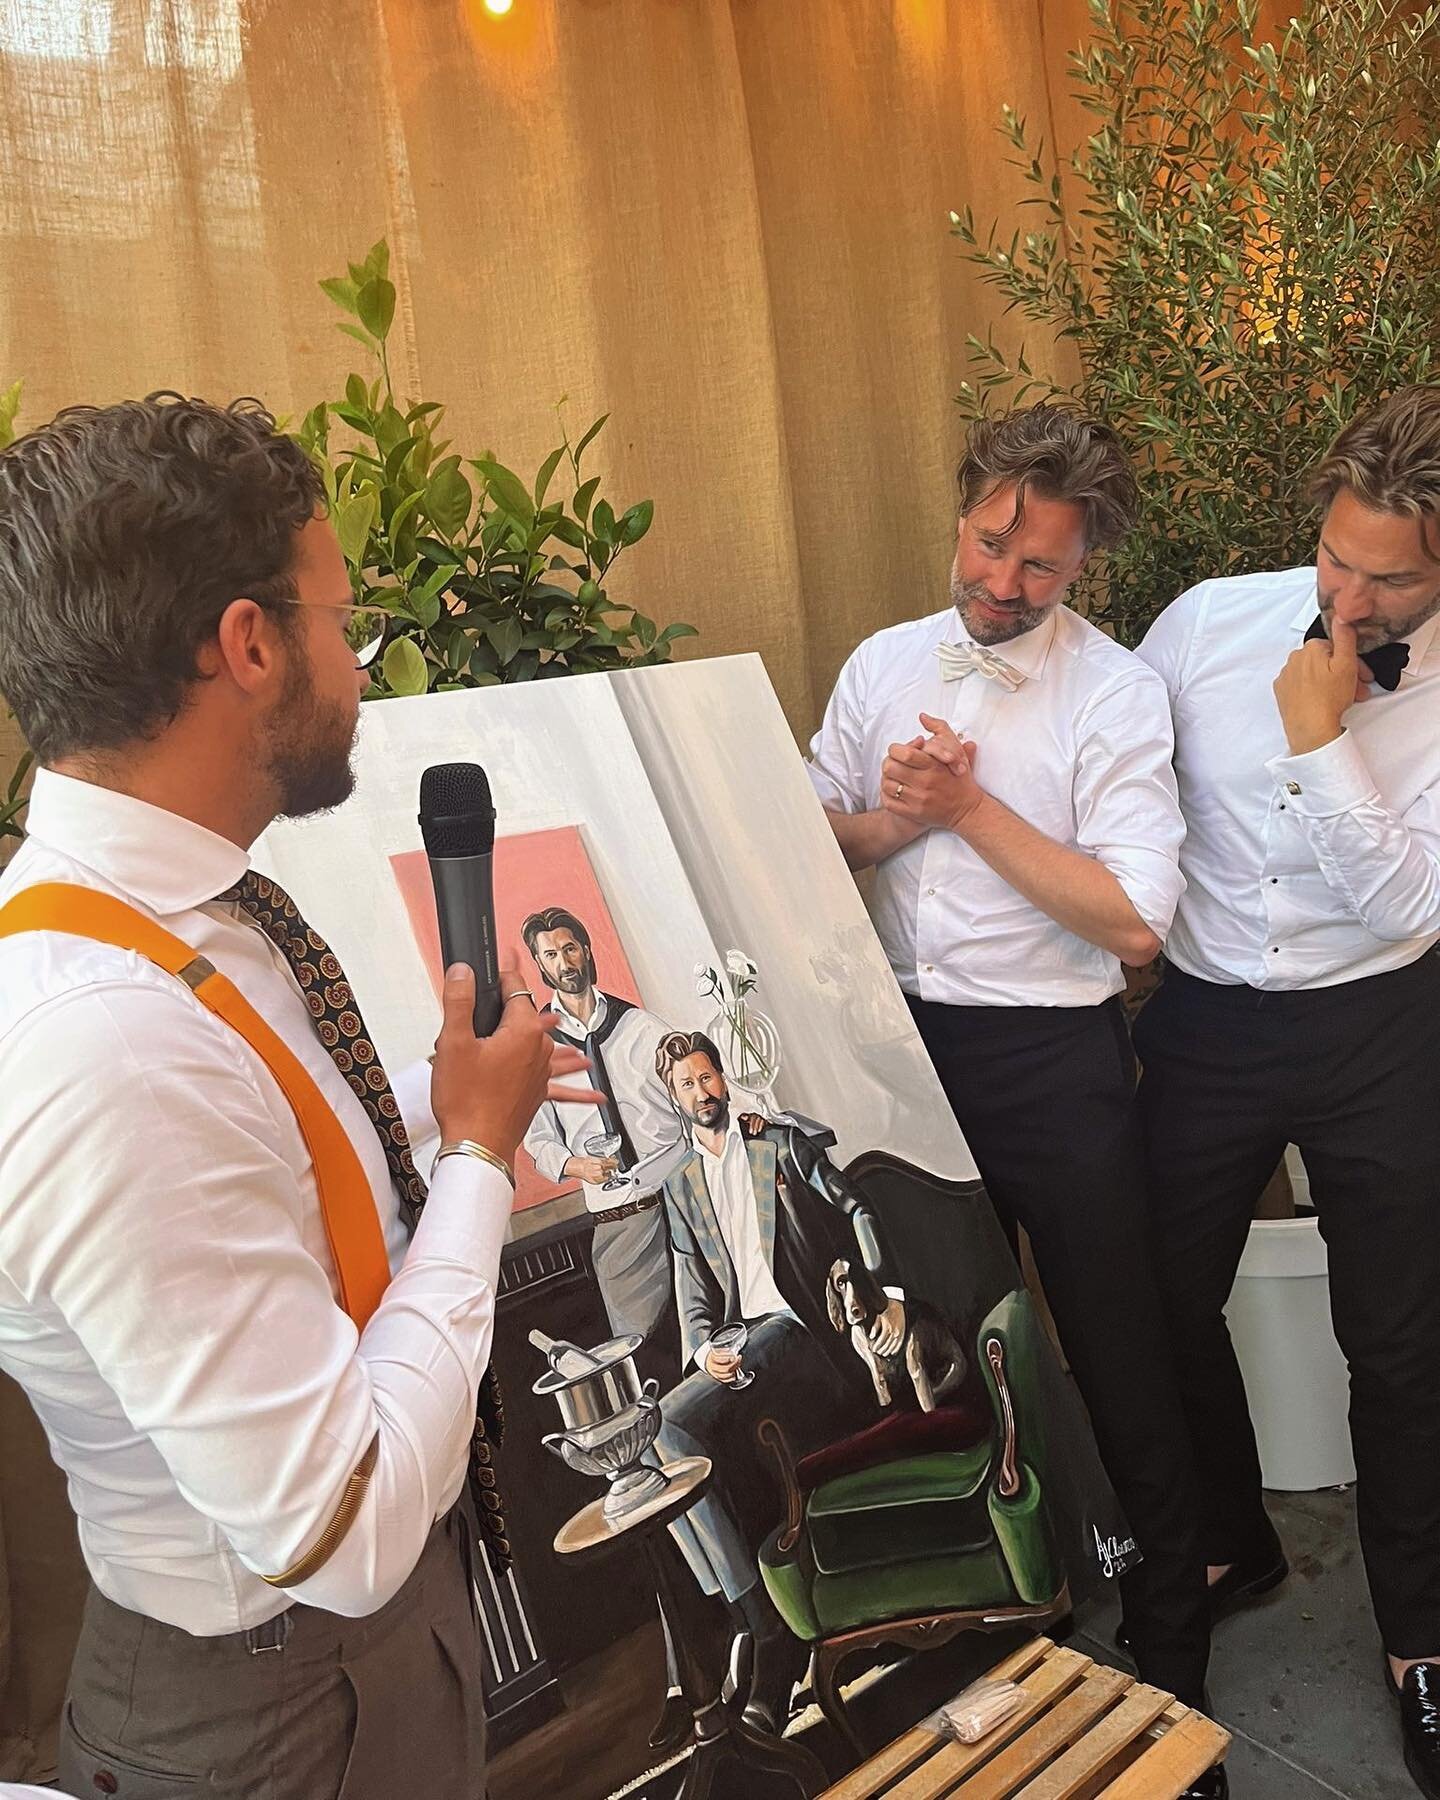 Presenting the State Portrait to the newly weds. 🤍🤵🏻&zwj;♂️🤵🏻&zwj;♂️ www.studioclaessen.com
Would you like this aswell? Don&rsquo;t hesitate to contact me. 🤍
.
.
.
.
.
.
#presentation #wedding #art #oilpainting #trouwerij #artist #alexanderclae